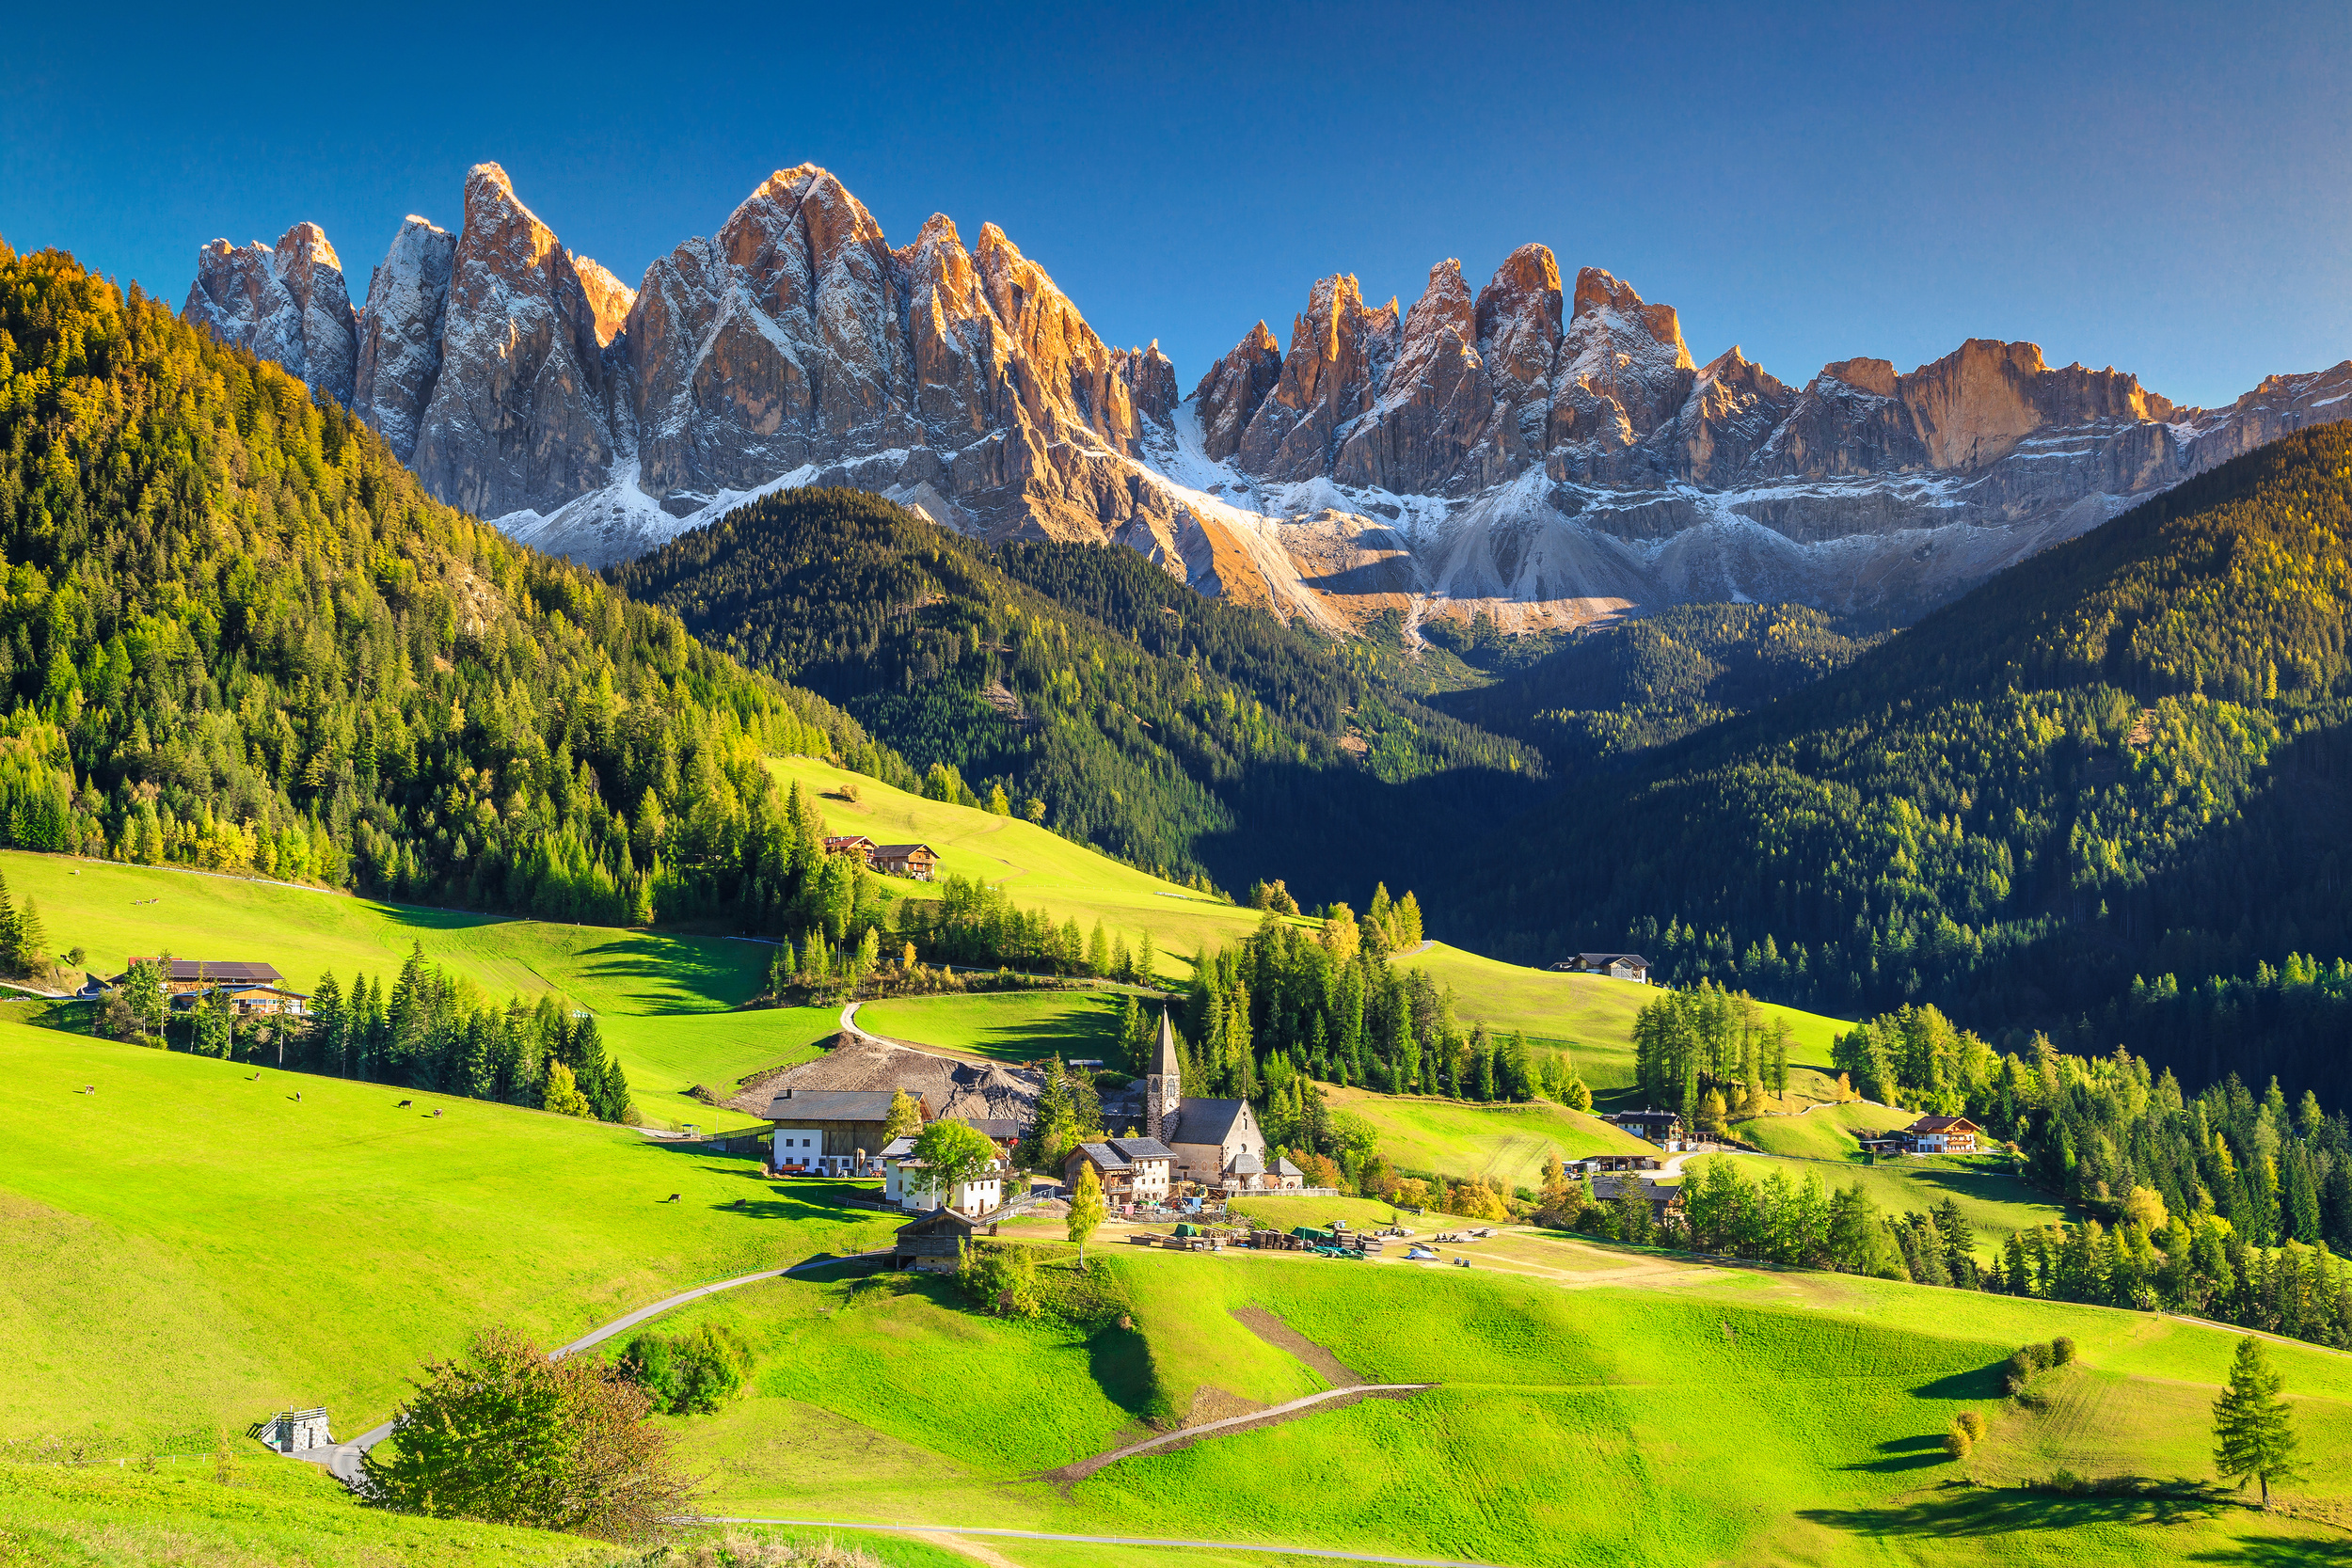 <p>Start in Milan and hit up all the major lakes in northern Italy, from glamorous Lake Como to less pretentious but still lovely Lake Garda and Lake Maggiore, plus plenty of other small ones. You’ll delight in the Italian mountain scenery!</p><p>You may also like: <a href='https://www.yardbarker.com/lifestyle/articles/20_essential_things_to_know_before_you_start_composting_031524/s1__36137261'>20 essential things to know before you start composting</a></p>